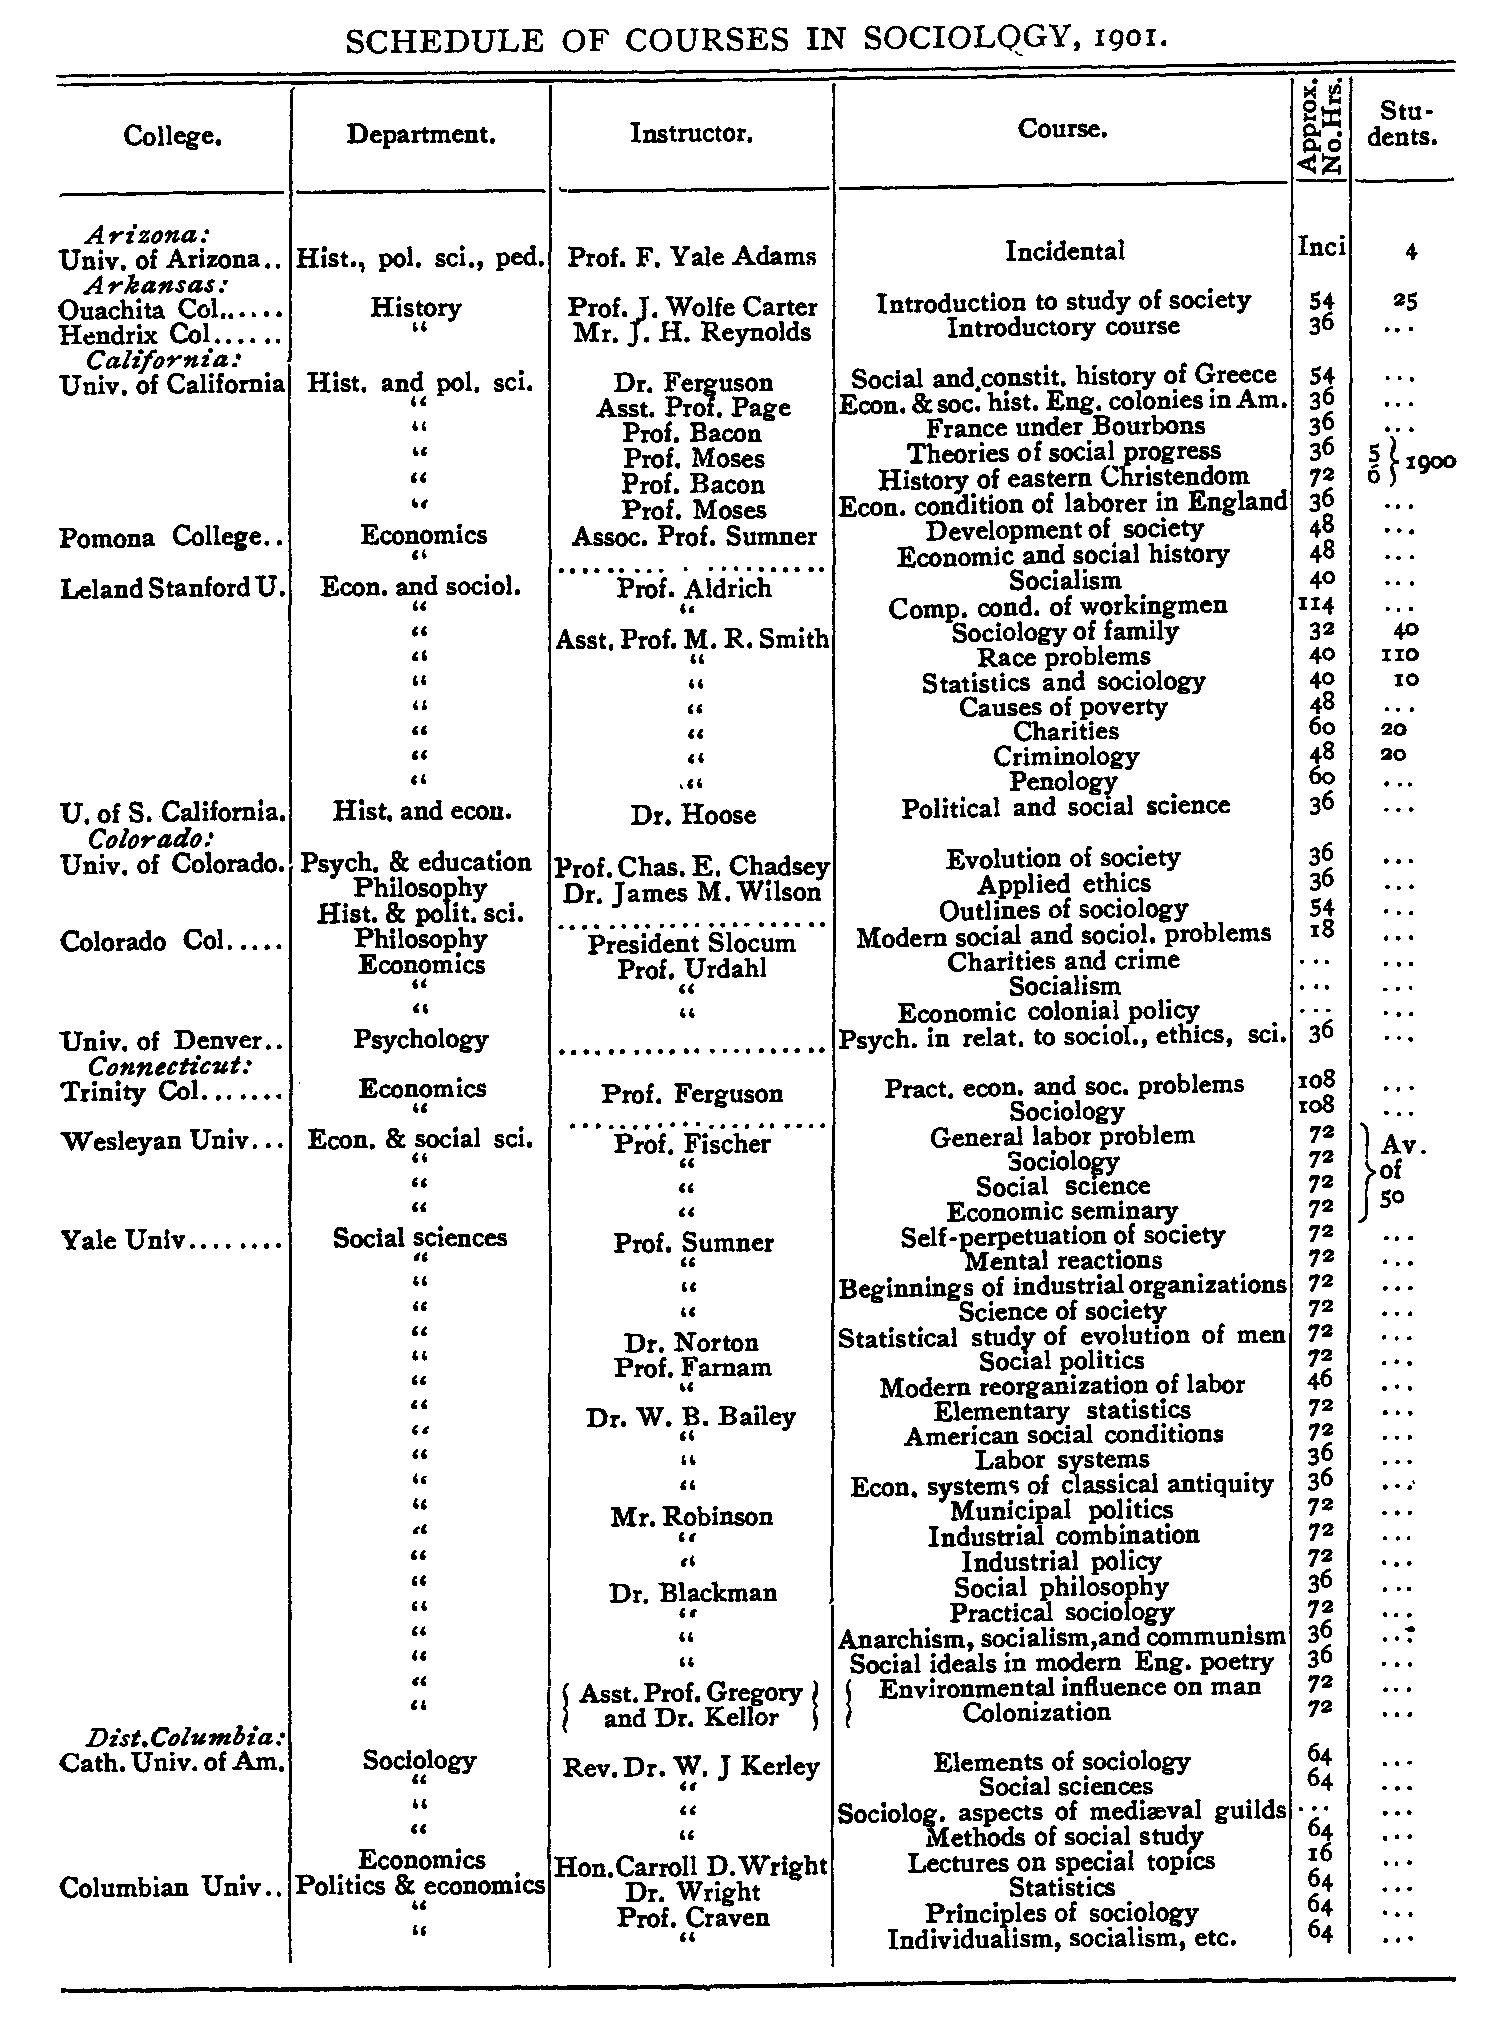 Schedule of Courses in Sociology in 1901